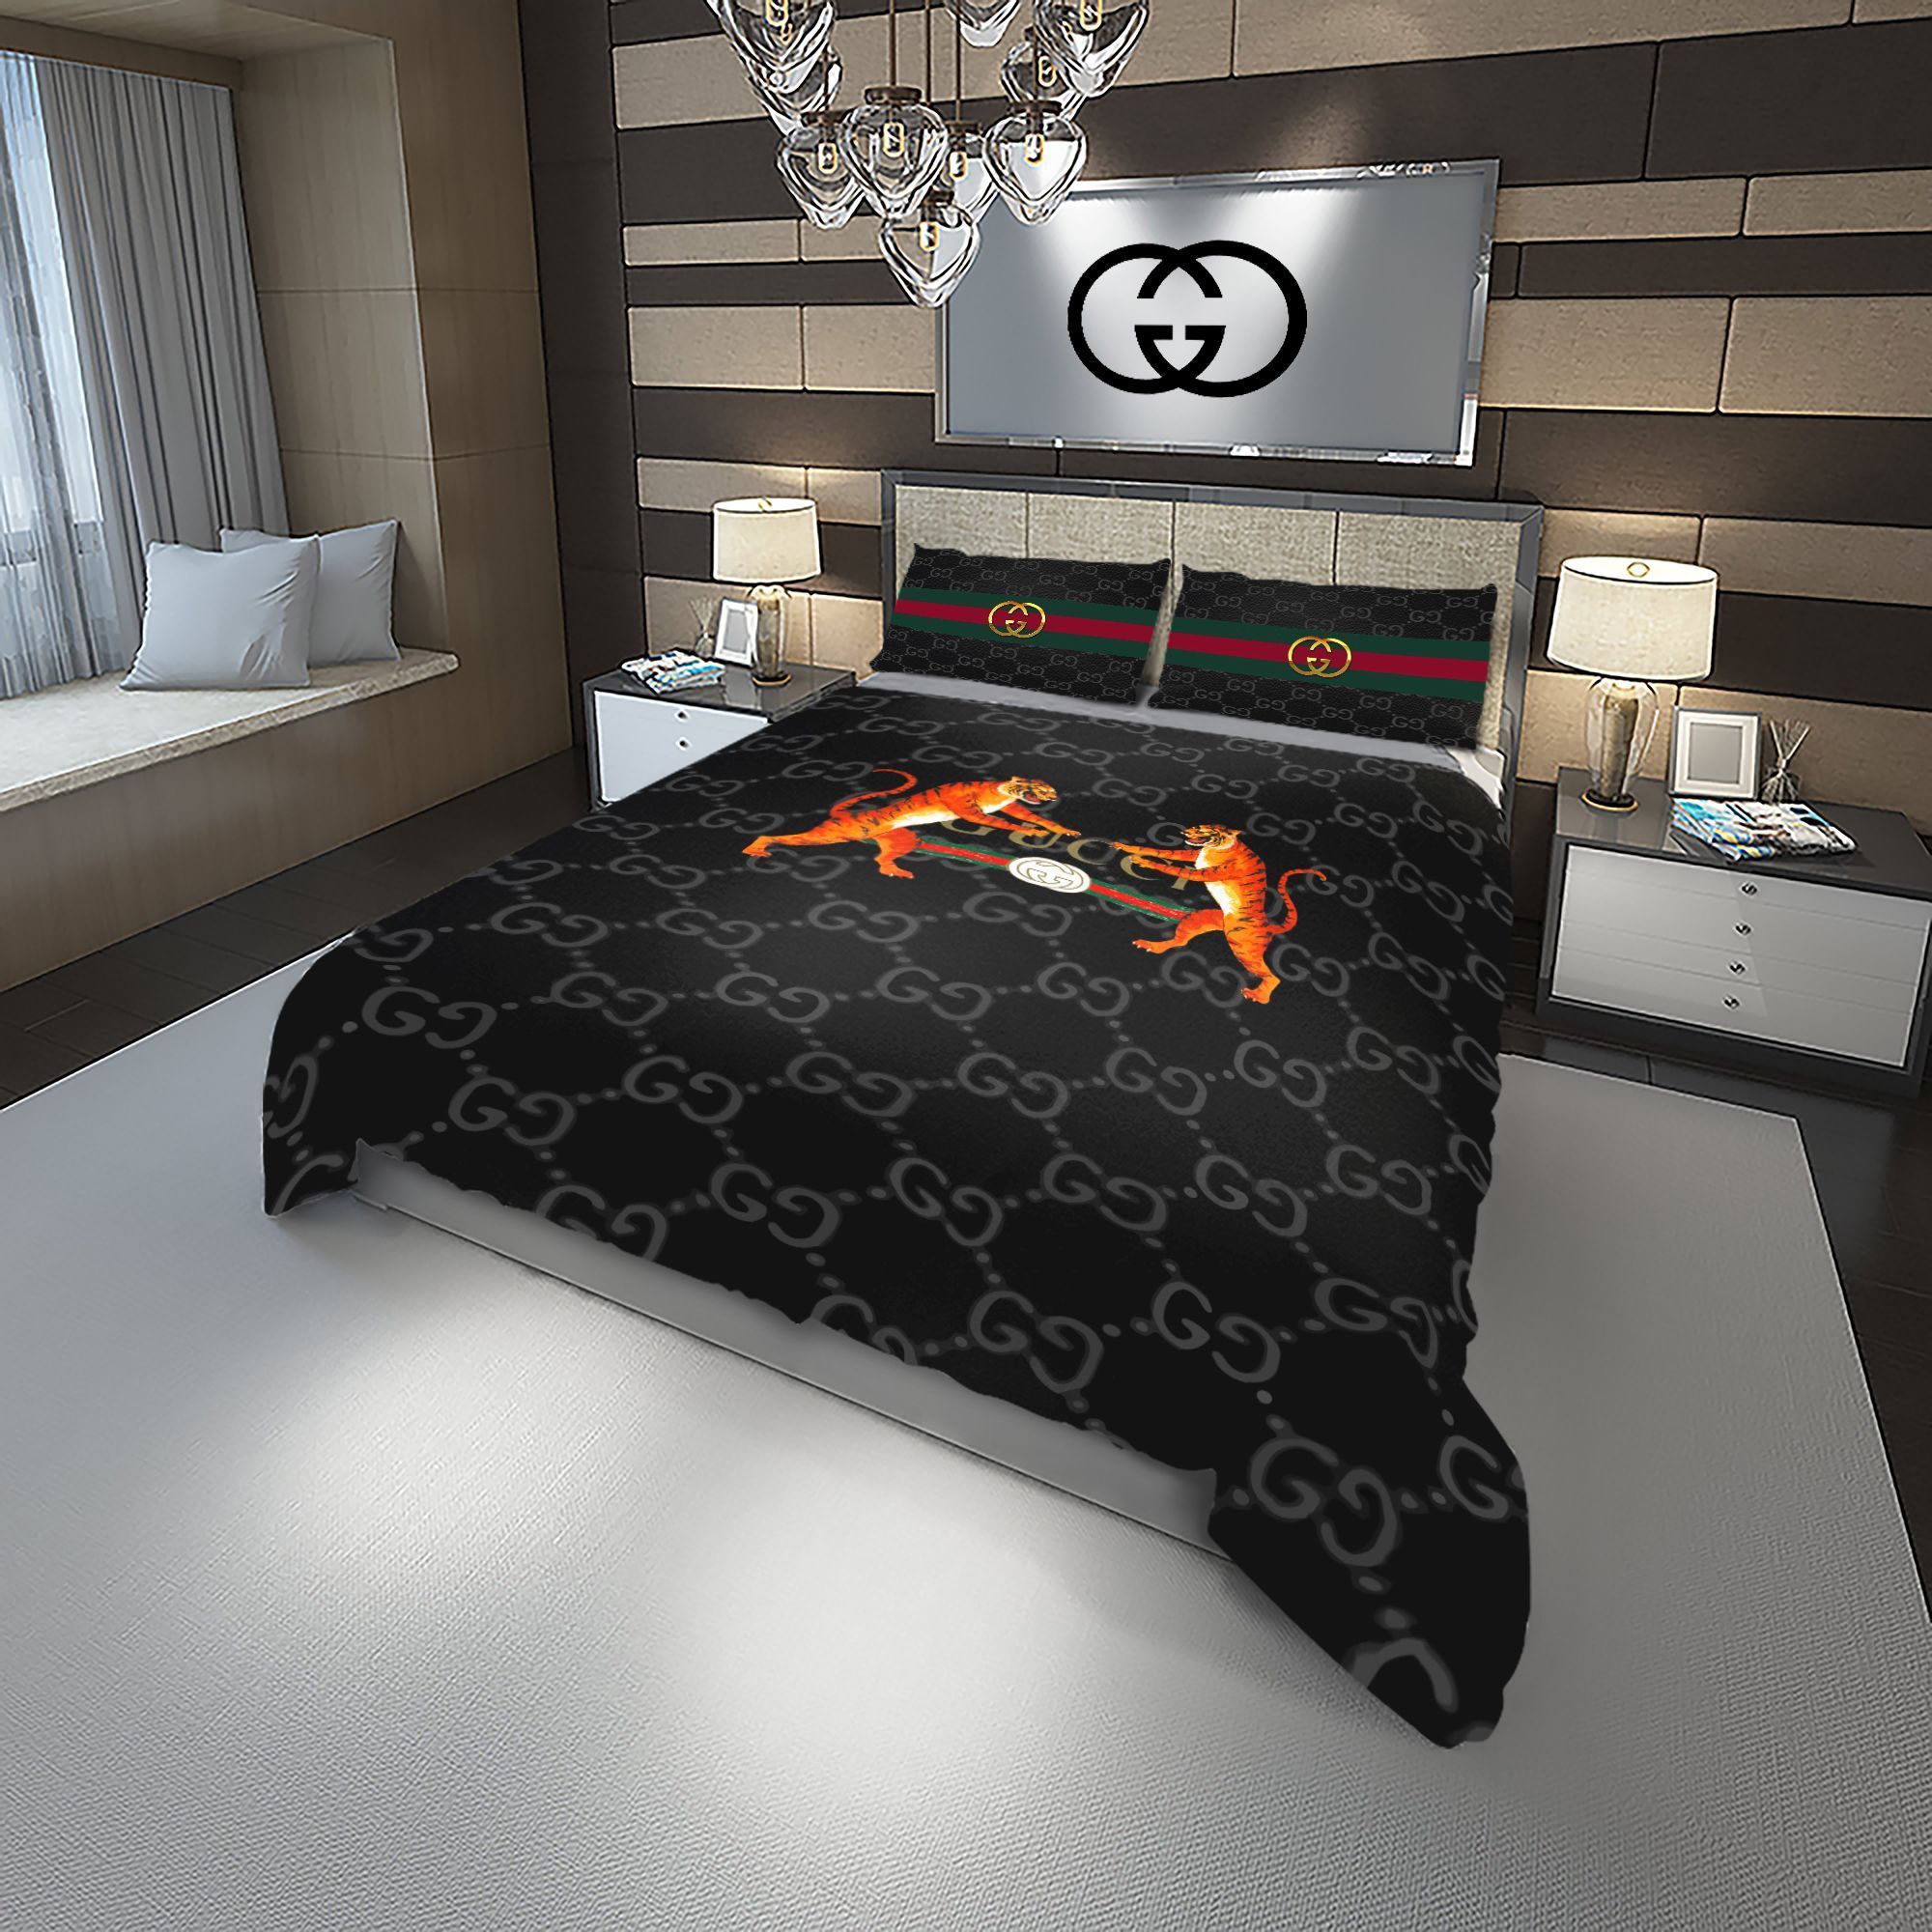 Let me show you about some luxury brand bedding set 2022 87